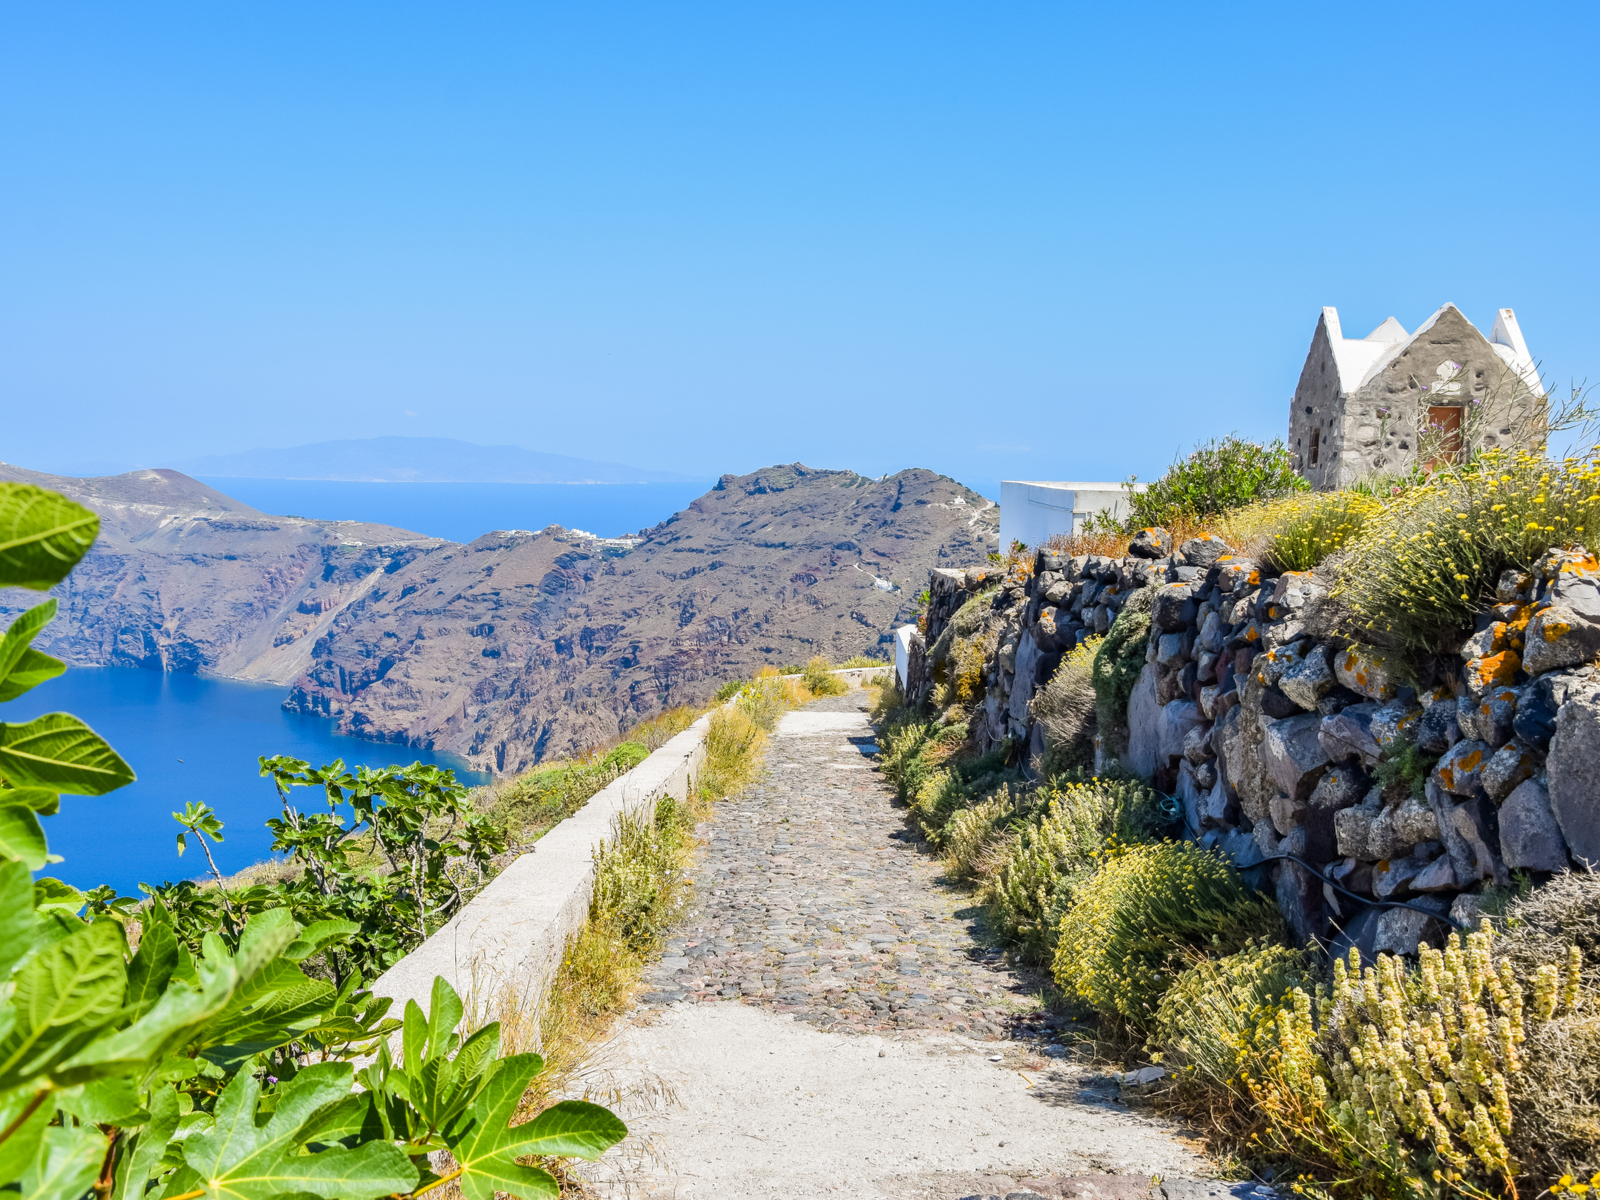 Hiking trail in Fira, one of the best things to do in Santorini